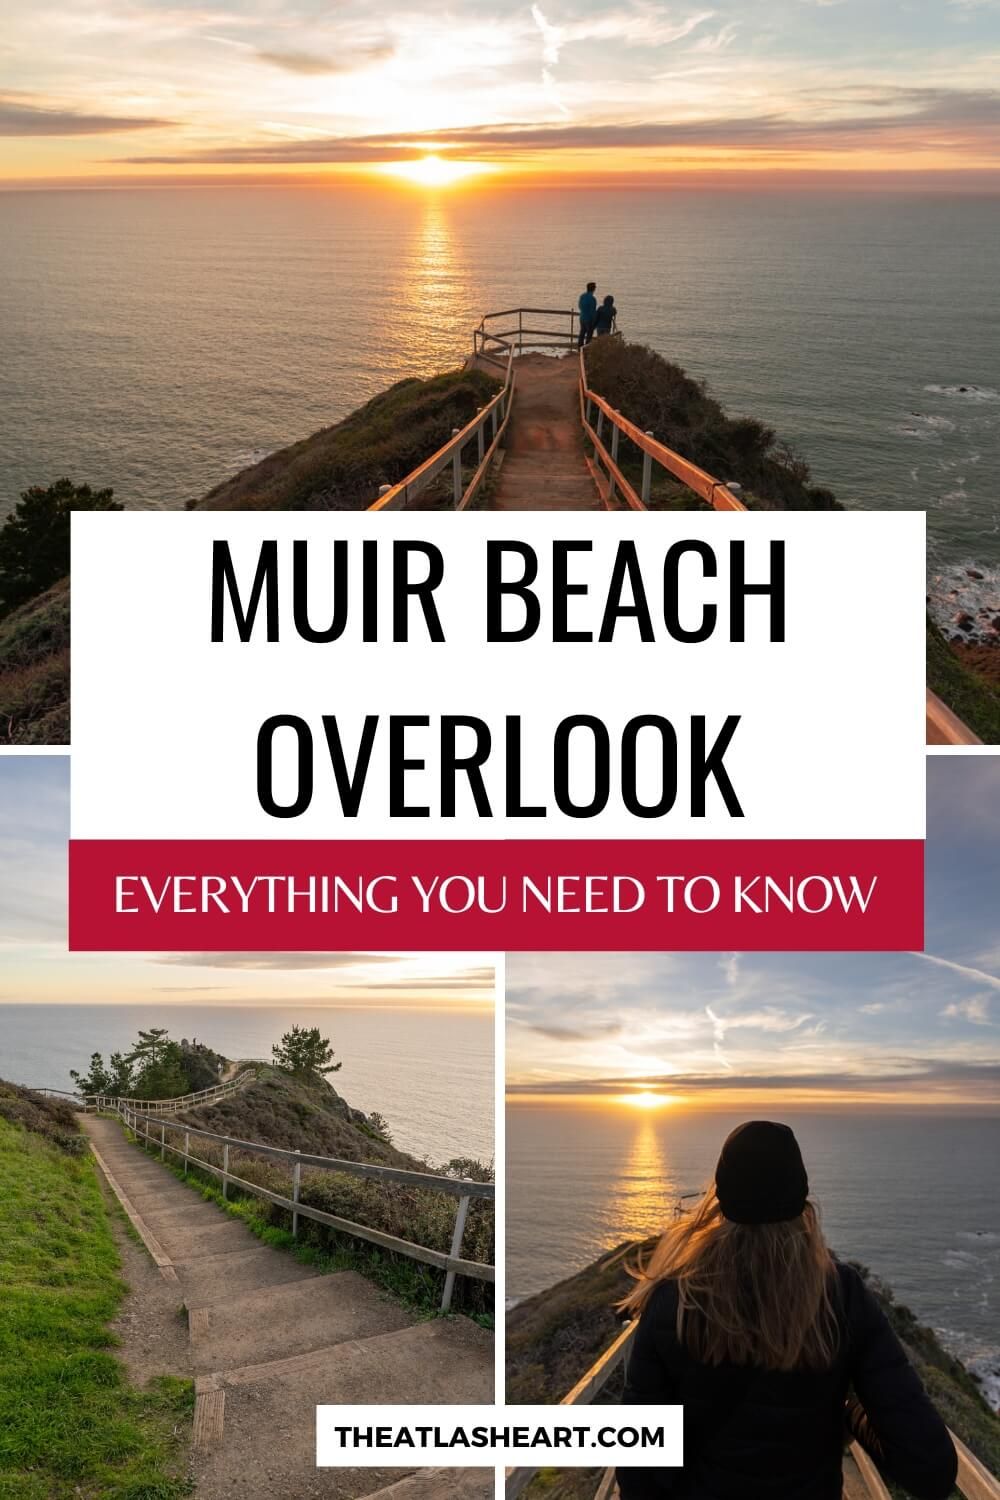 A collage of images depicting view of the Muir Beach Overlook, with the text overlay, "Muir Beach Overlook."